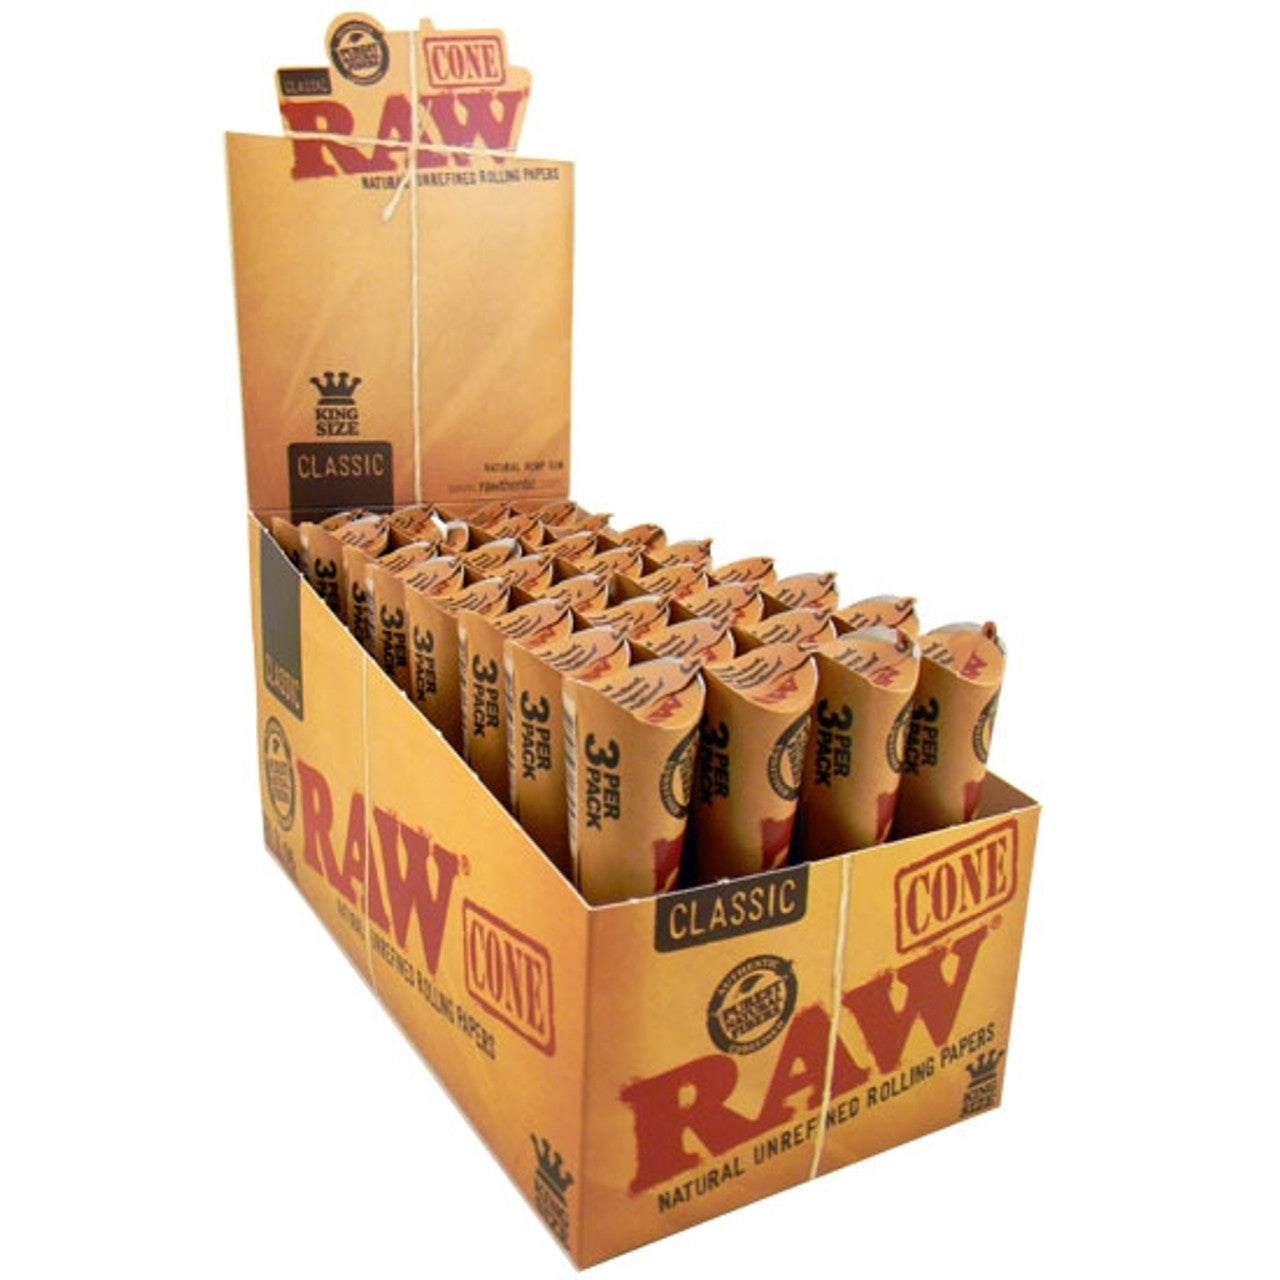 Raw - Classic King Size 3 pack Cones -32CT Display